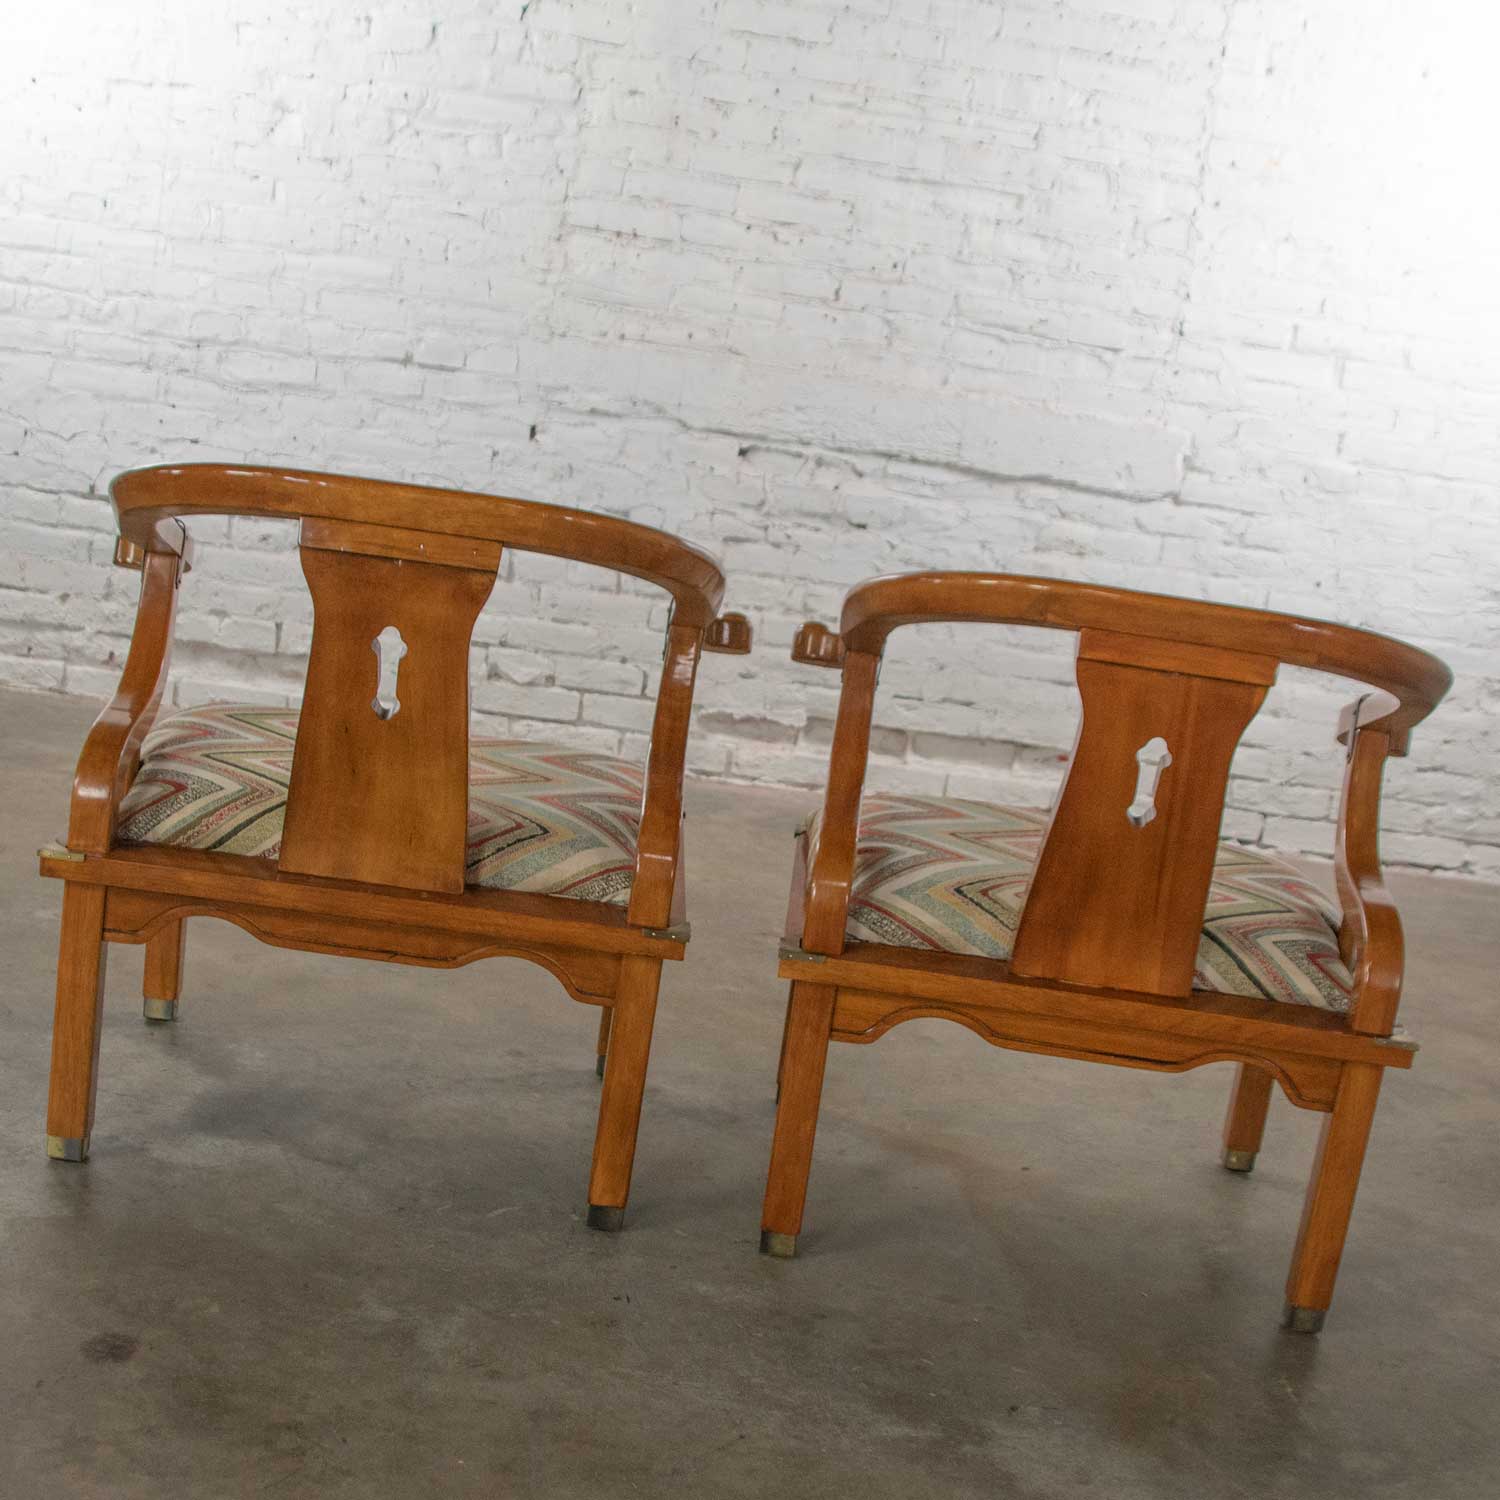 Chinoiserie Ming Style Pair of Yoke Back Lounge Chairs Attributed to Schnadig Furniture